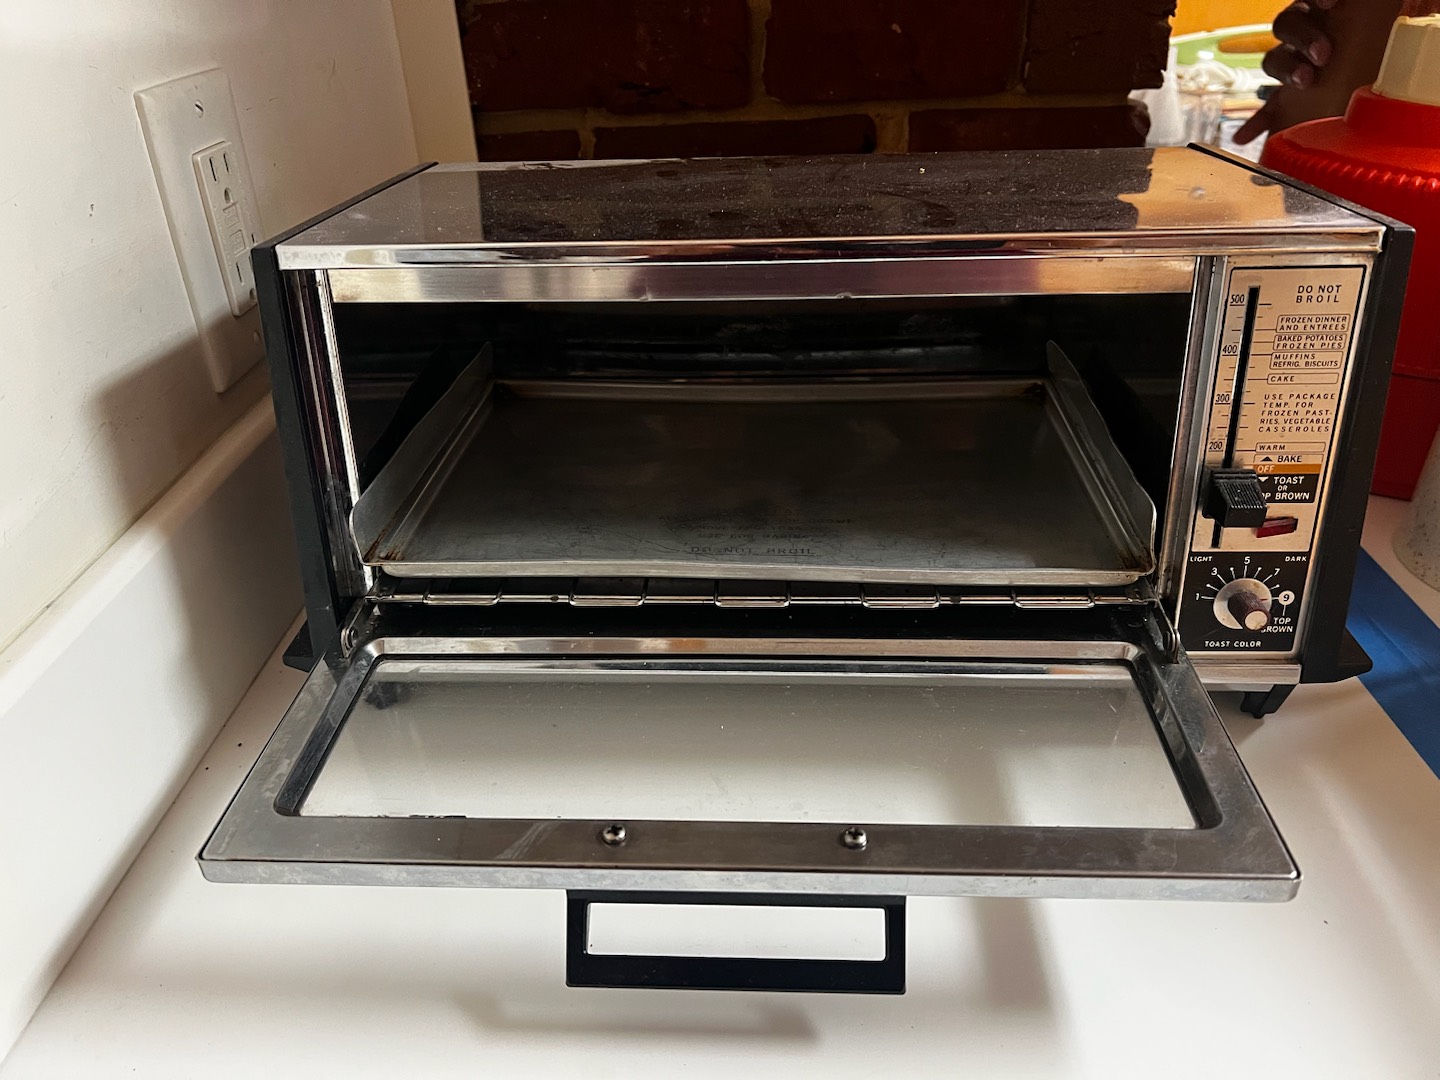 BLACK AND DECKER 4 SLICE TOASTER OVEN - Dallas Online Auction Company